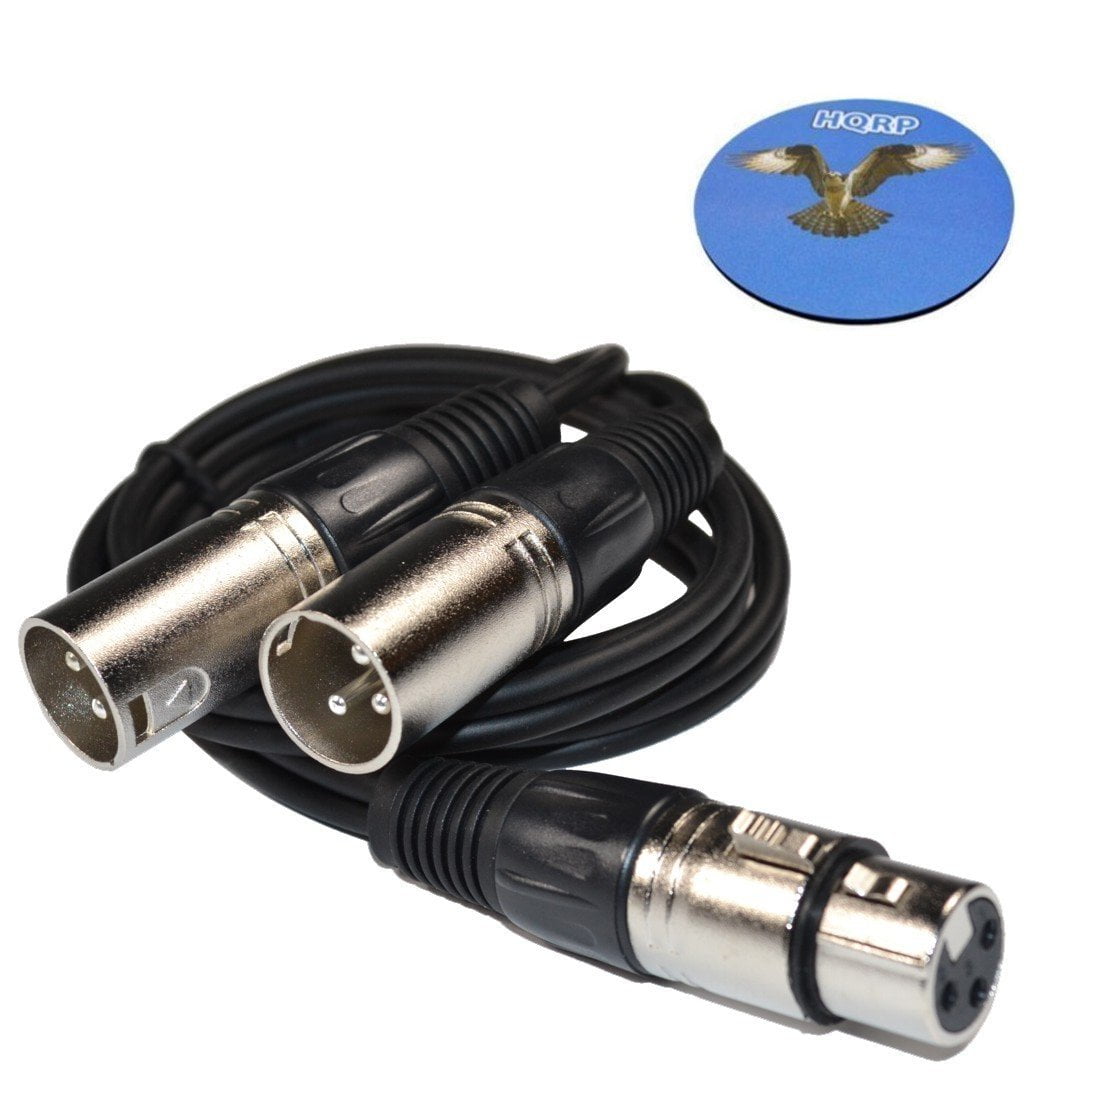 HQRP 6m XLR Male to XLR Female Microphone Balanced Lead Cable for Behringer XM8500 Dynamic Cardioid Microphone